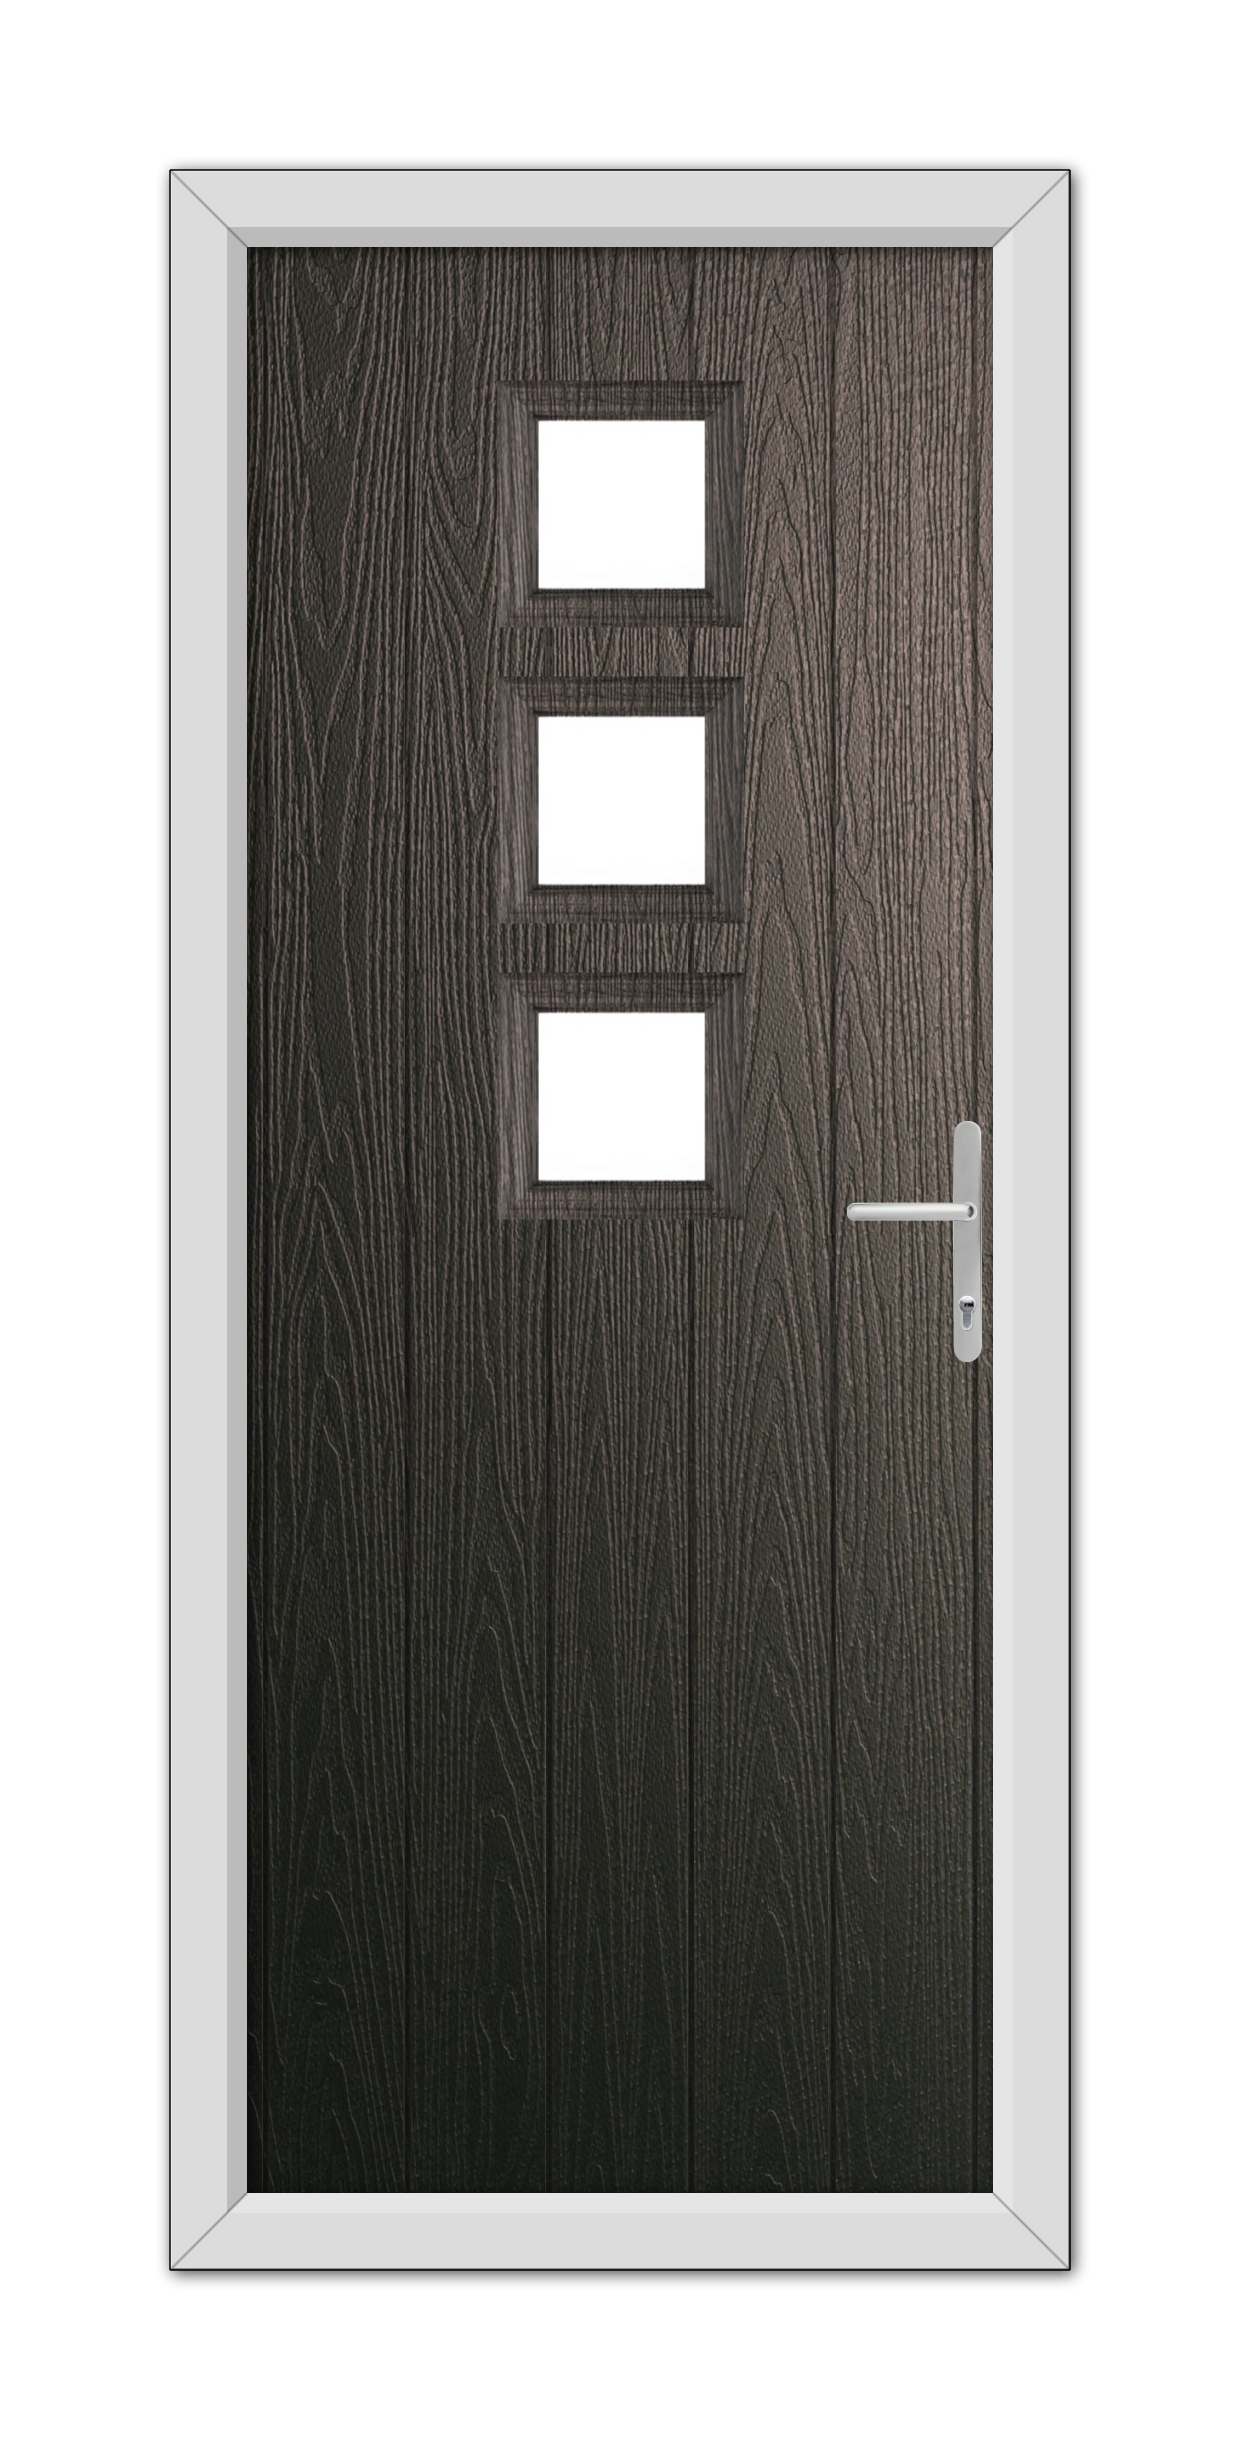 A modern Schwarzbraun Montrose Composite Door 48mm Timber Core with three rectangular glass panels and a metal handle, set in a white frame.